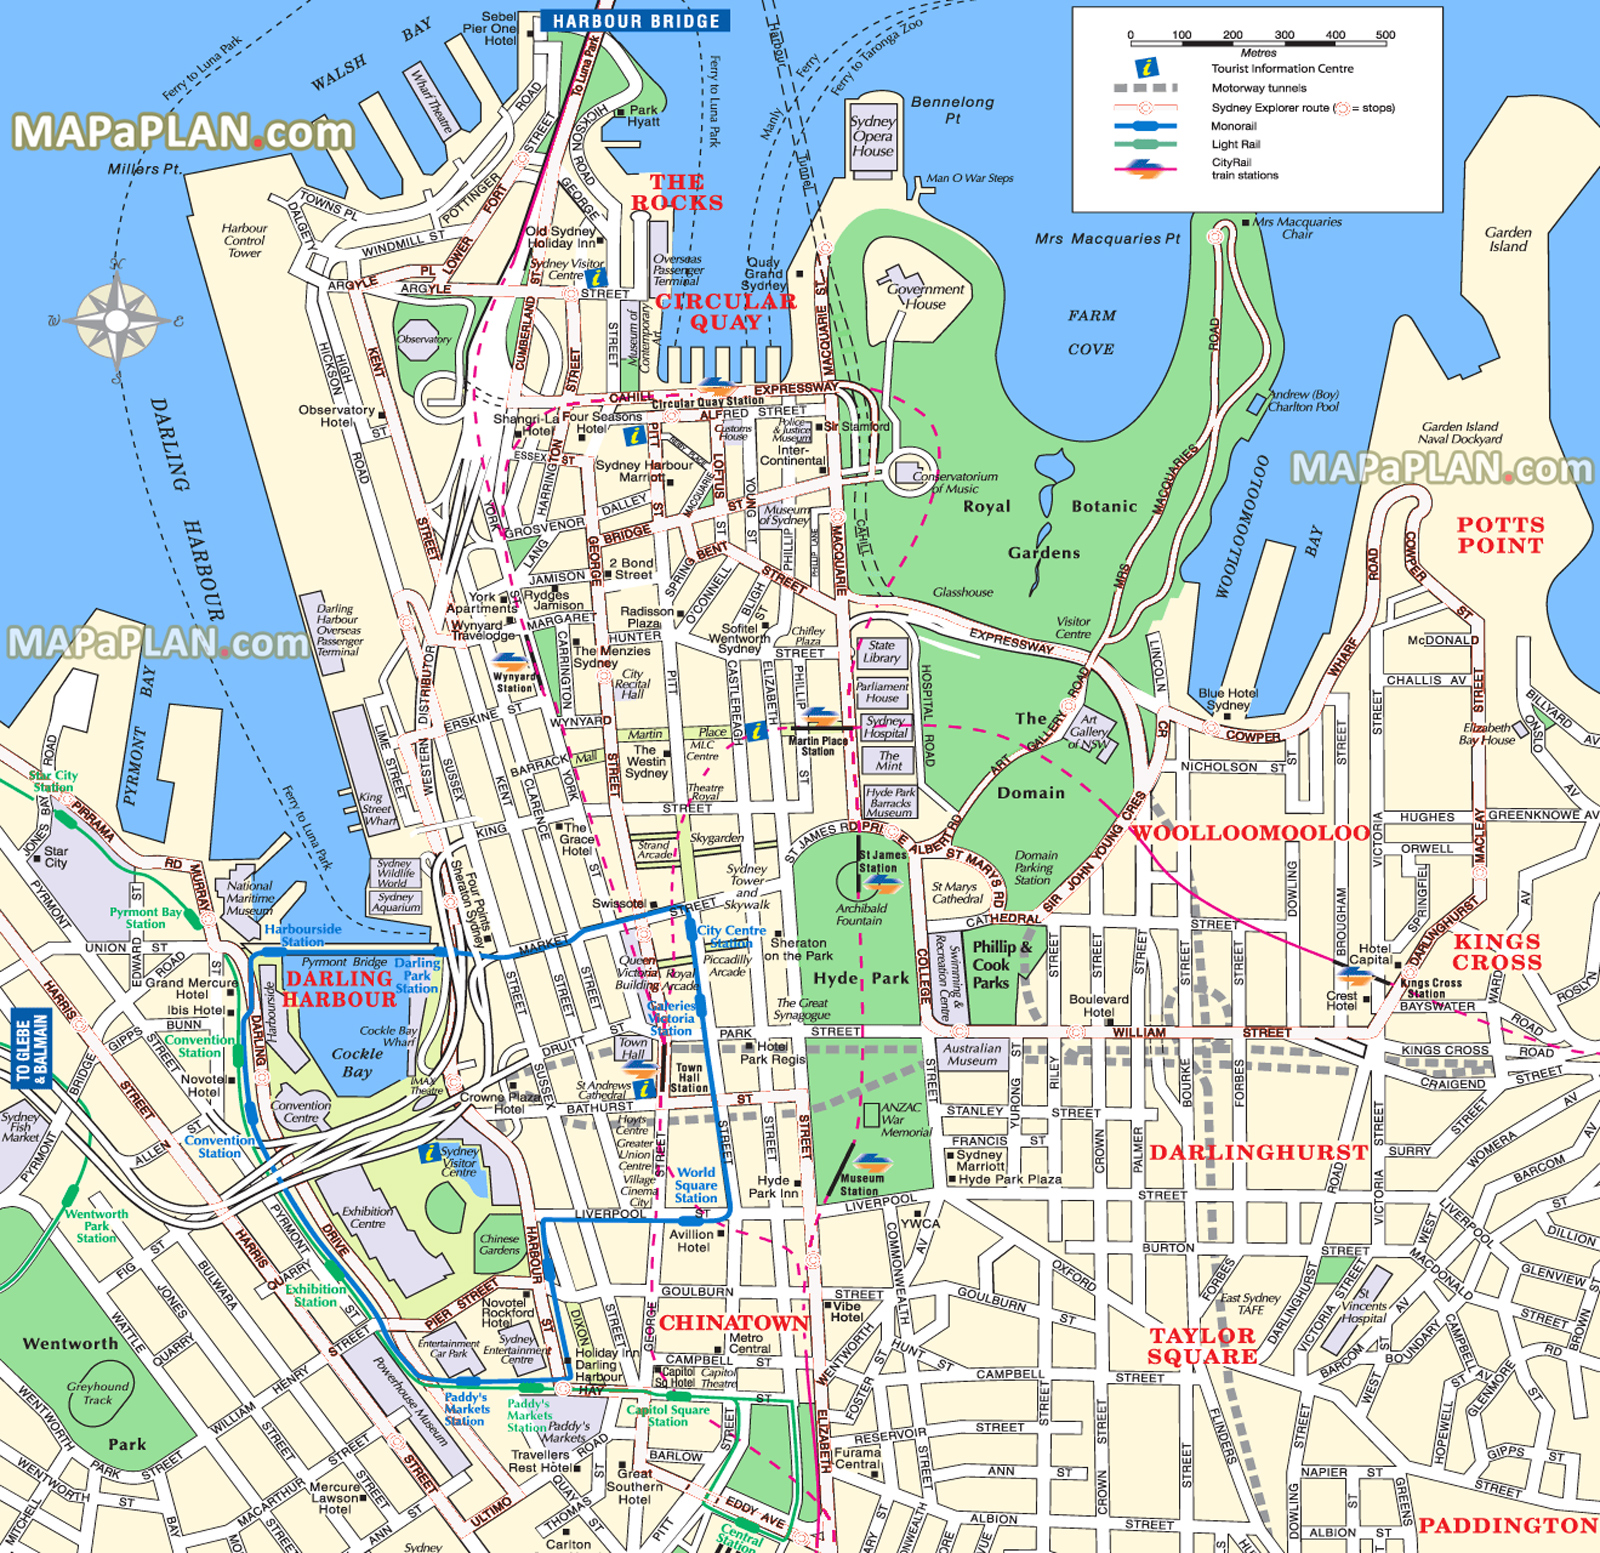 Sydney maps - Top tourist attractions - Free, printable city ...